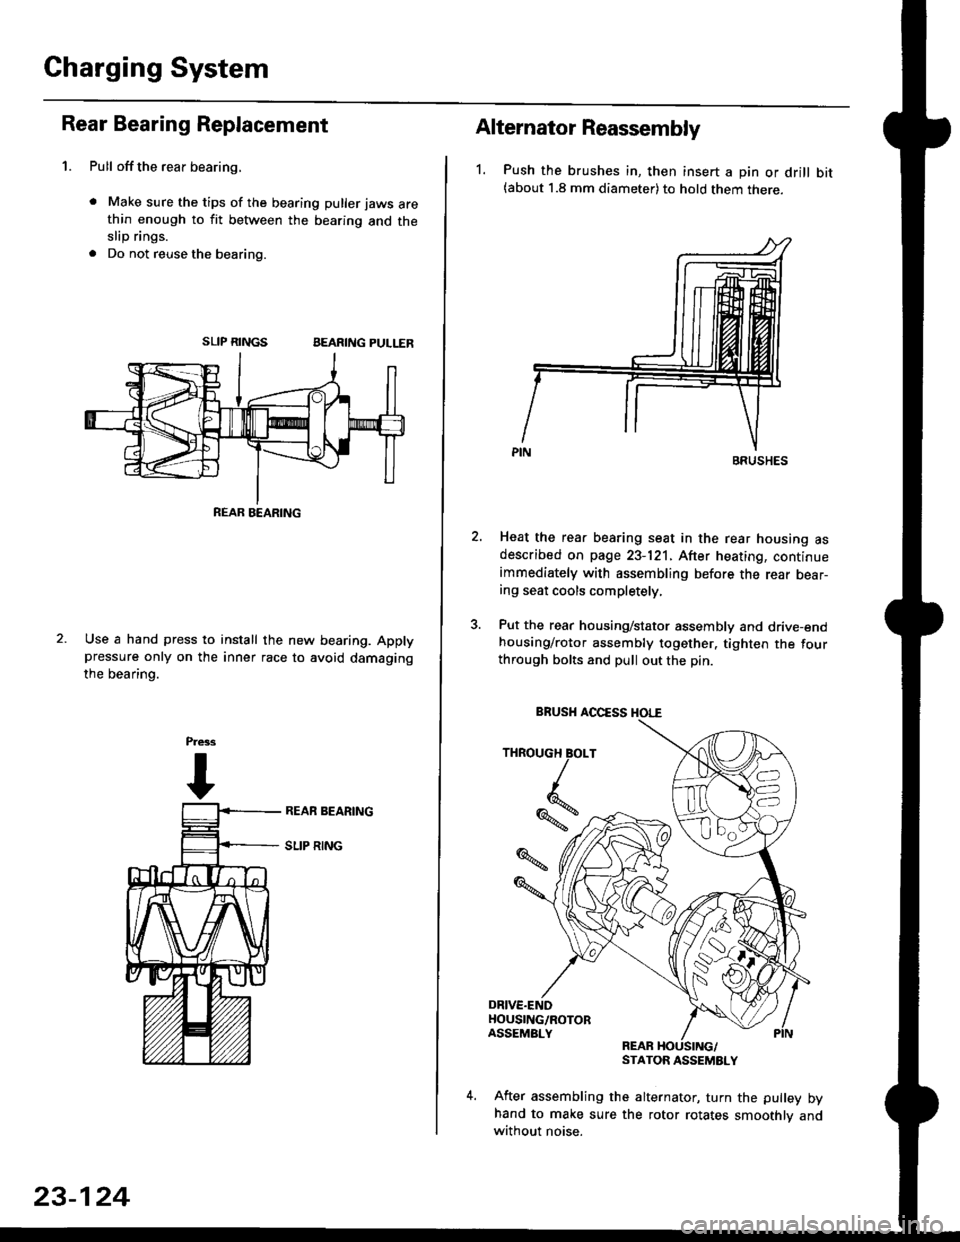 HONDA CIVIC 1996 6.G Workshop Manual Gharging System
Rear Bearing Replacement
1. Pull offthe rear bearing,
. Make sure the tips of the bearing puller jaws arethin enough to fit between the bearing and theslip rings.
. Do not reuse the be